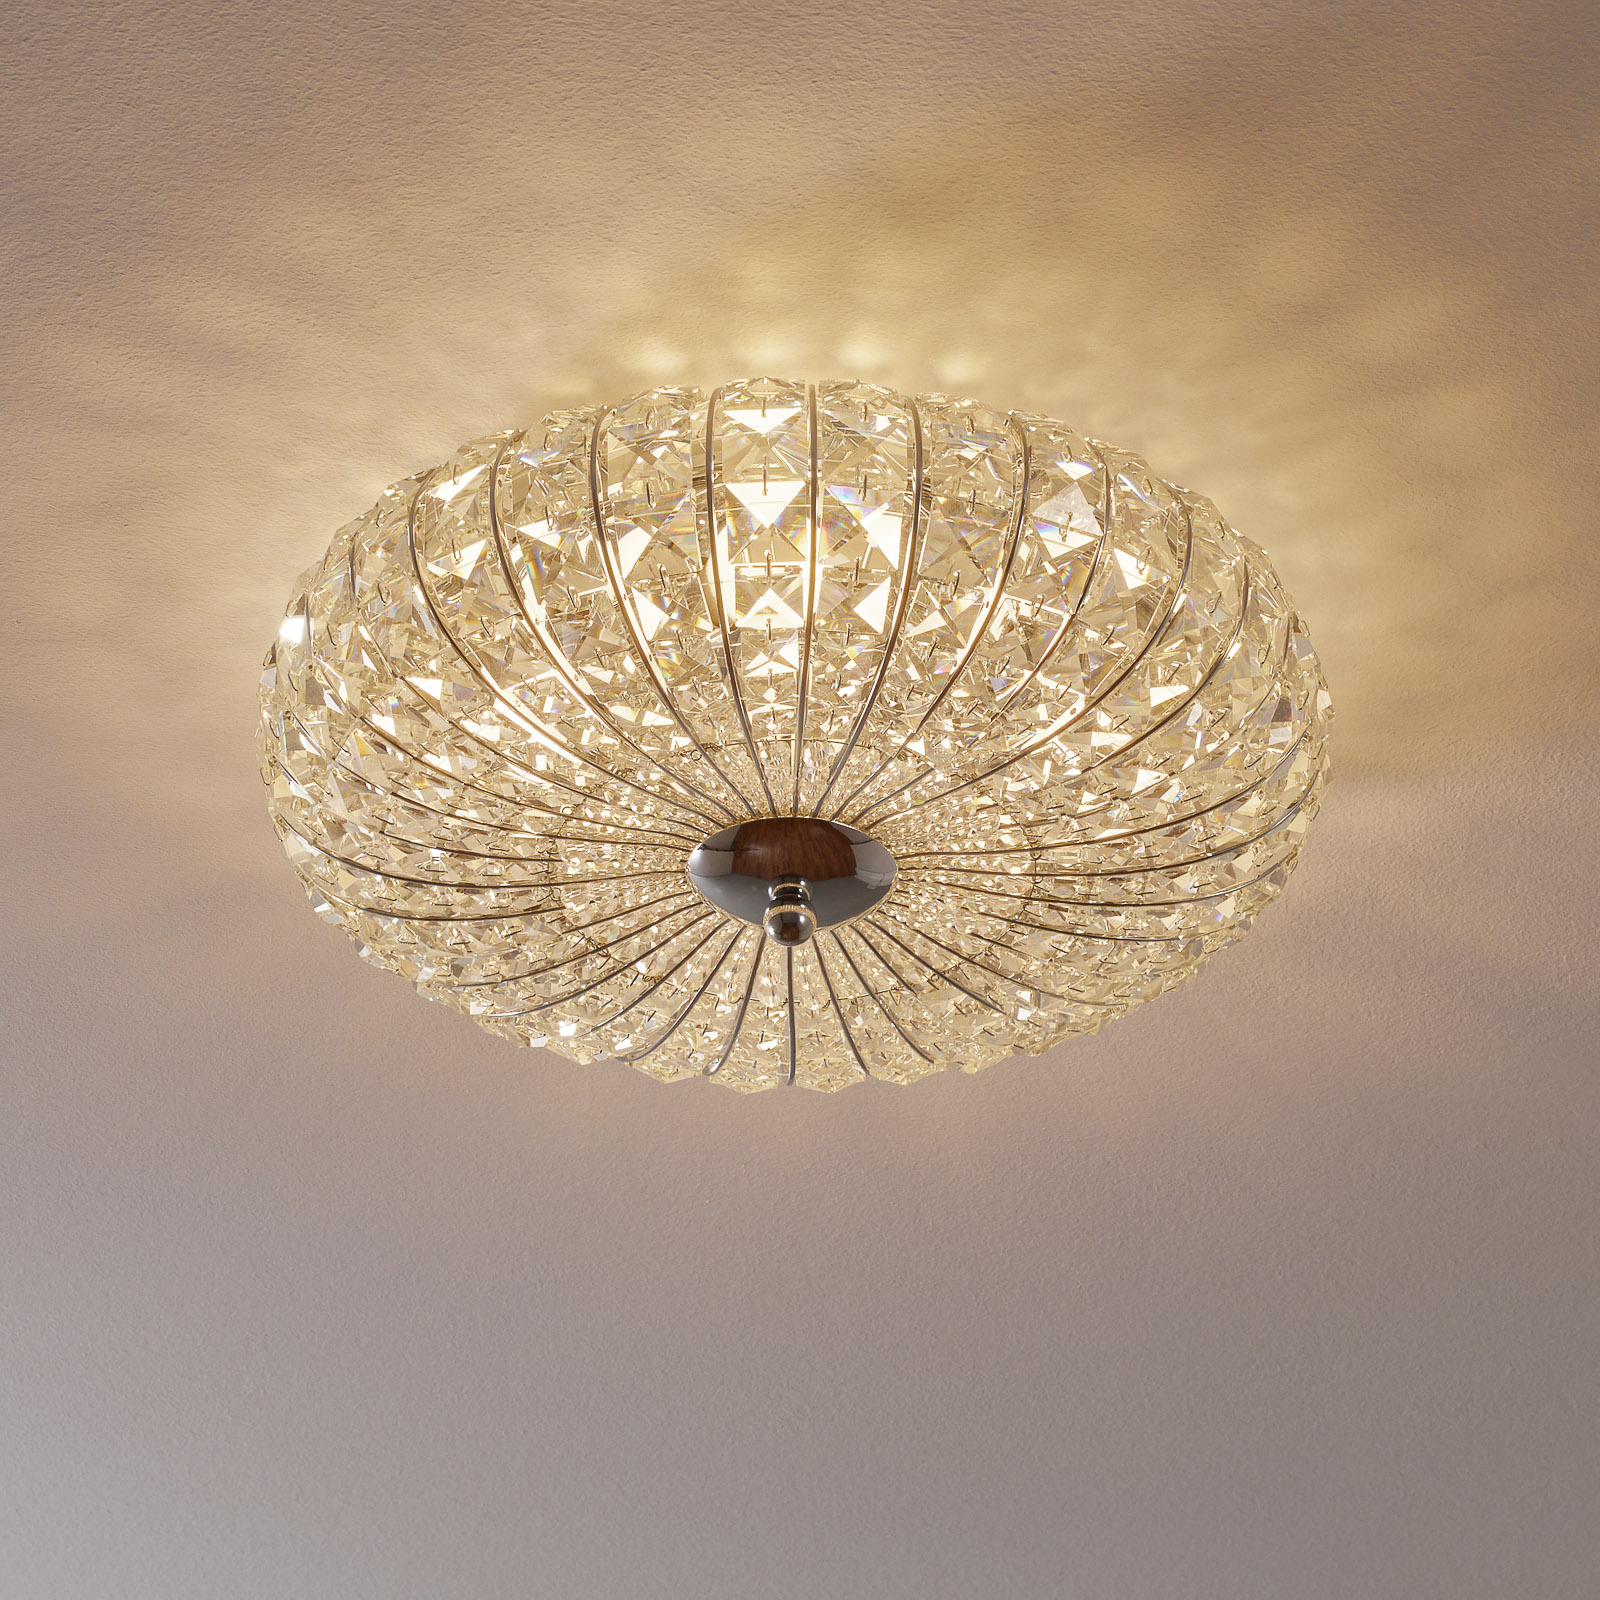 Broche ceiling light with crystals | Lights.co.uk